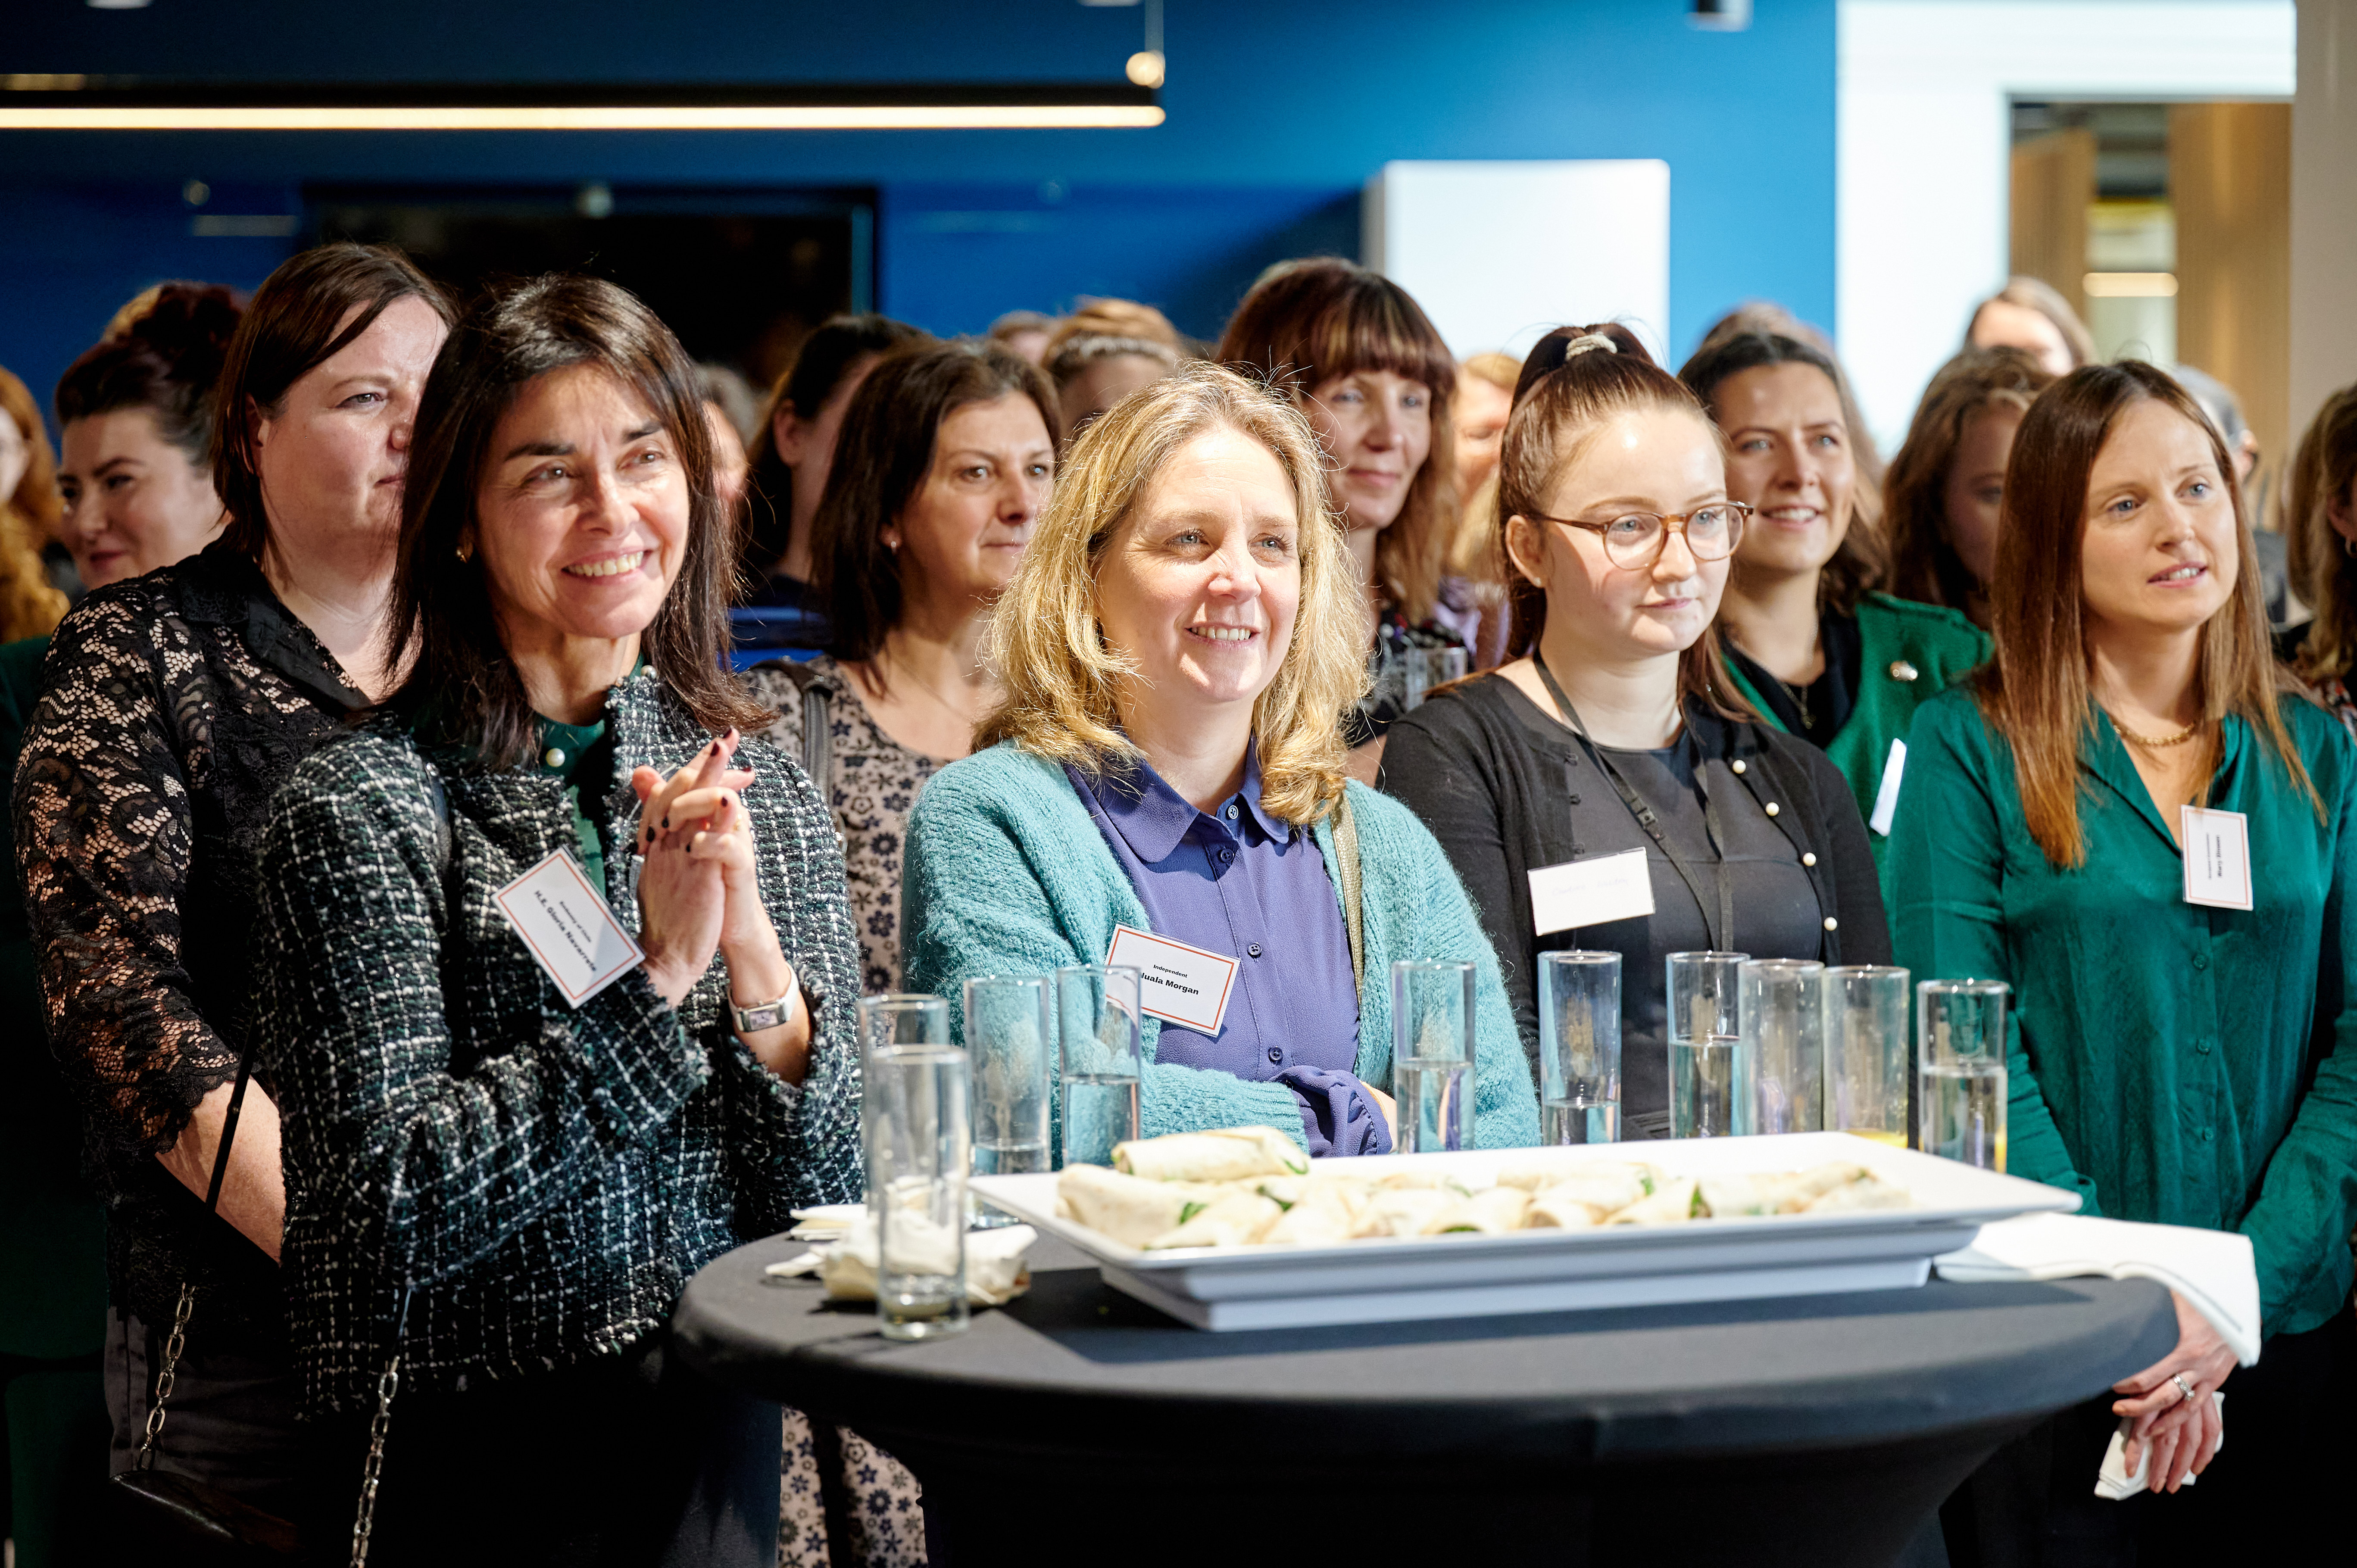 Saint Brigid's Day networking event held in Brussels on 1 February 2023.